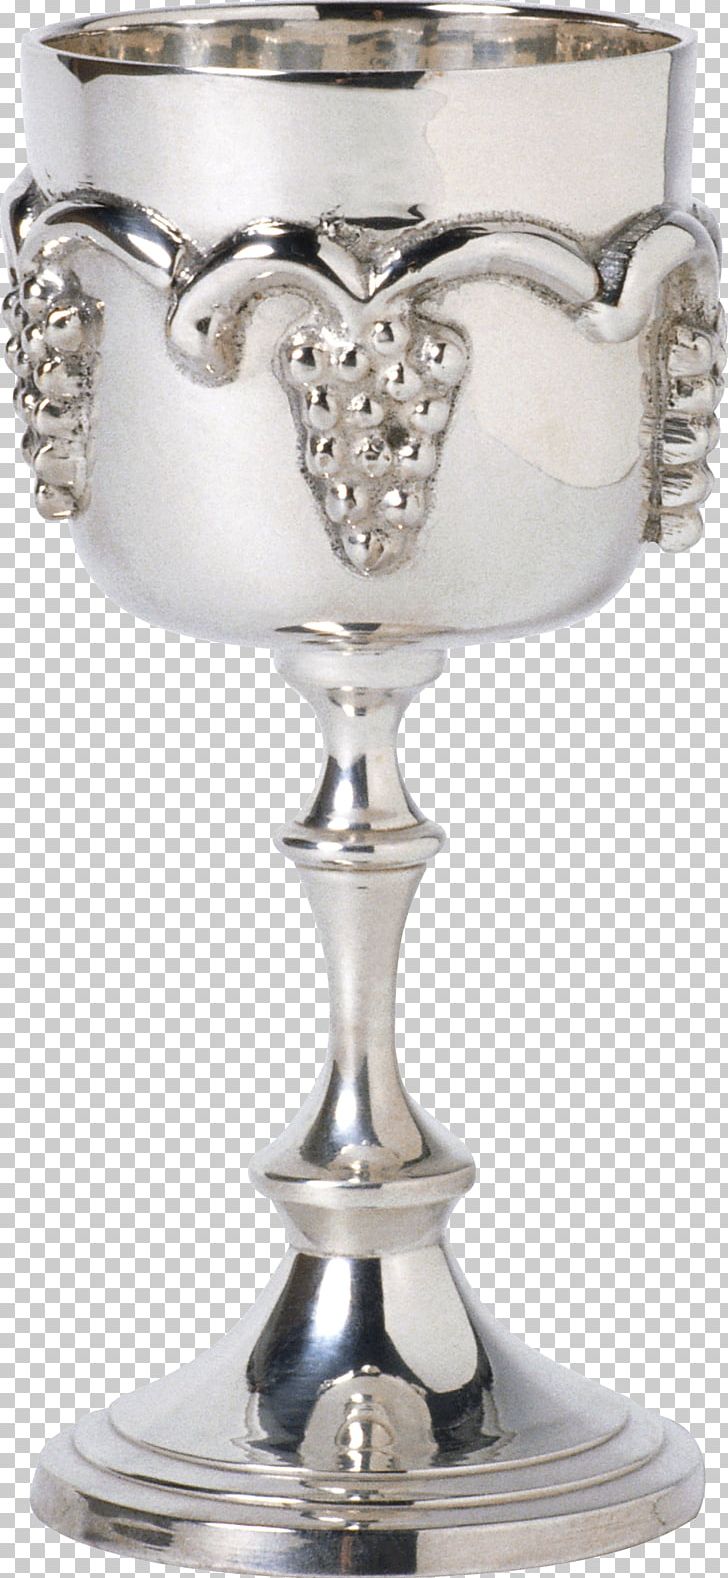 Tea Cup Cocktail Fizzy Drinks PNG, Clipart, Chalice, Champagne, Champagne Stemware, Cocktail, Coffee Cup Free PNG Download